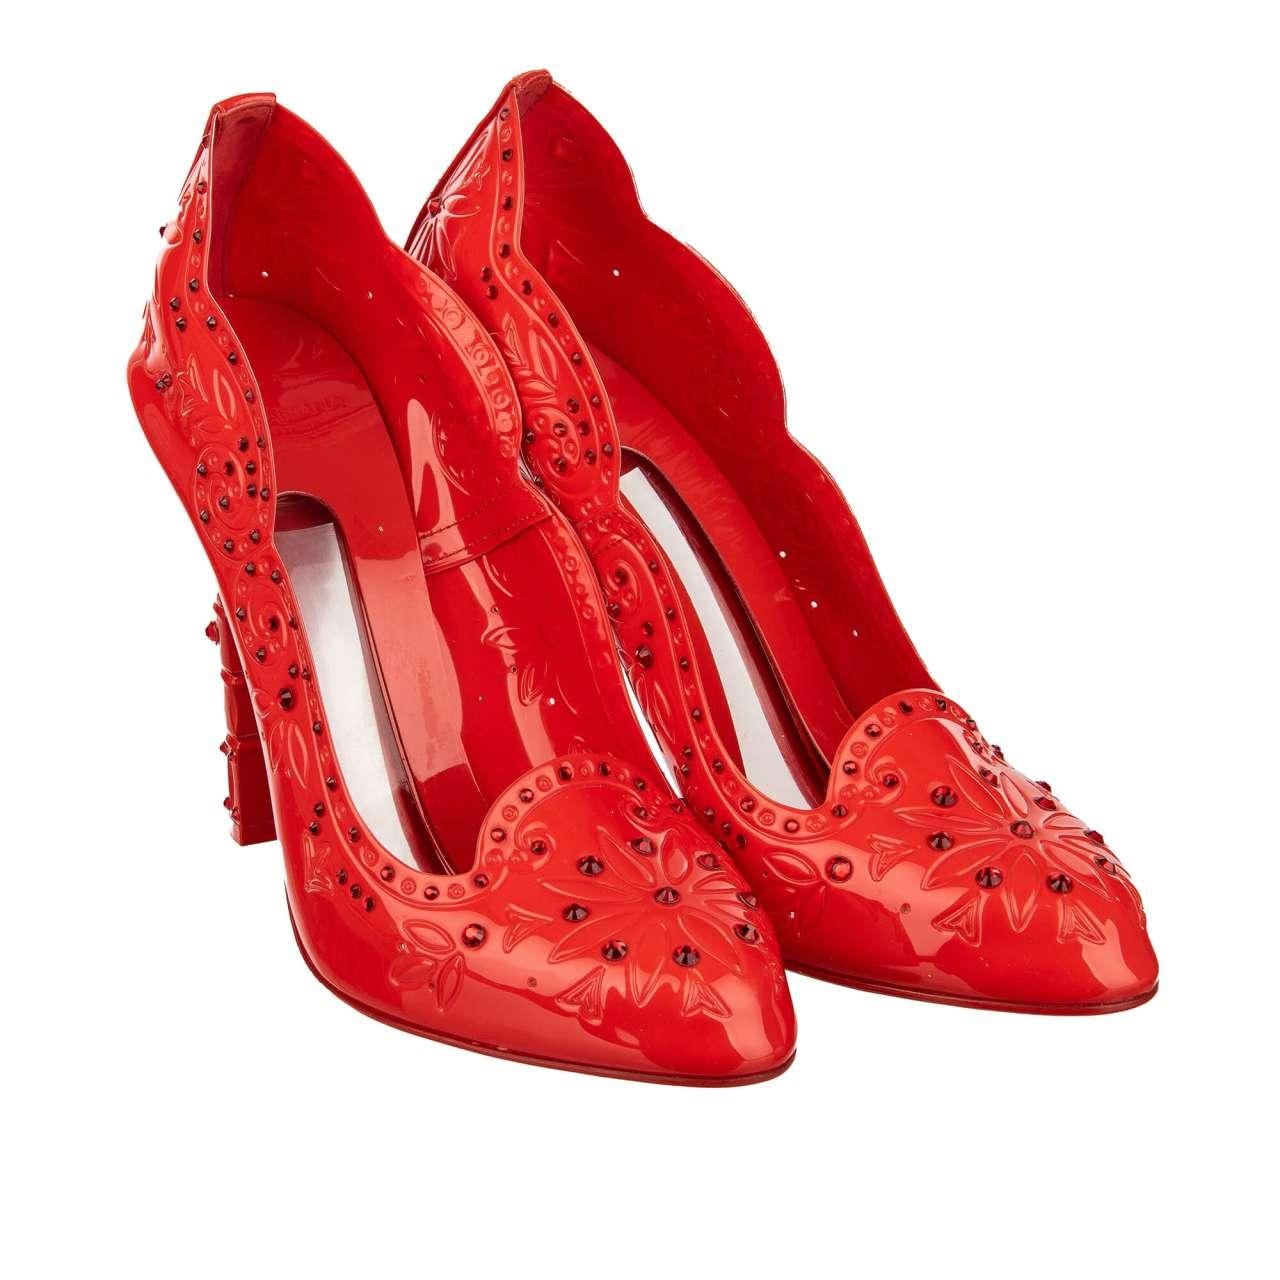 Dolce & Gabbana - Cinderella PVC Crystals Pumps Red 39 9 For Sale 3